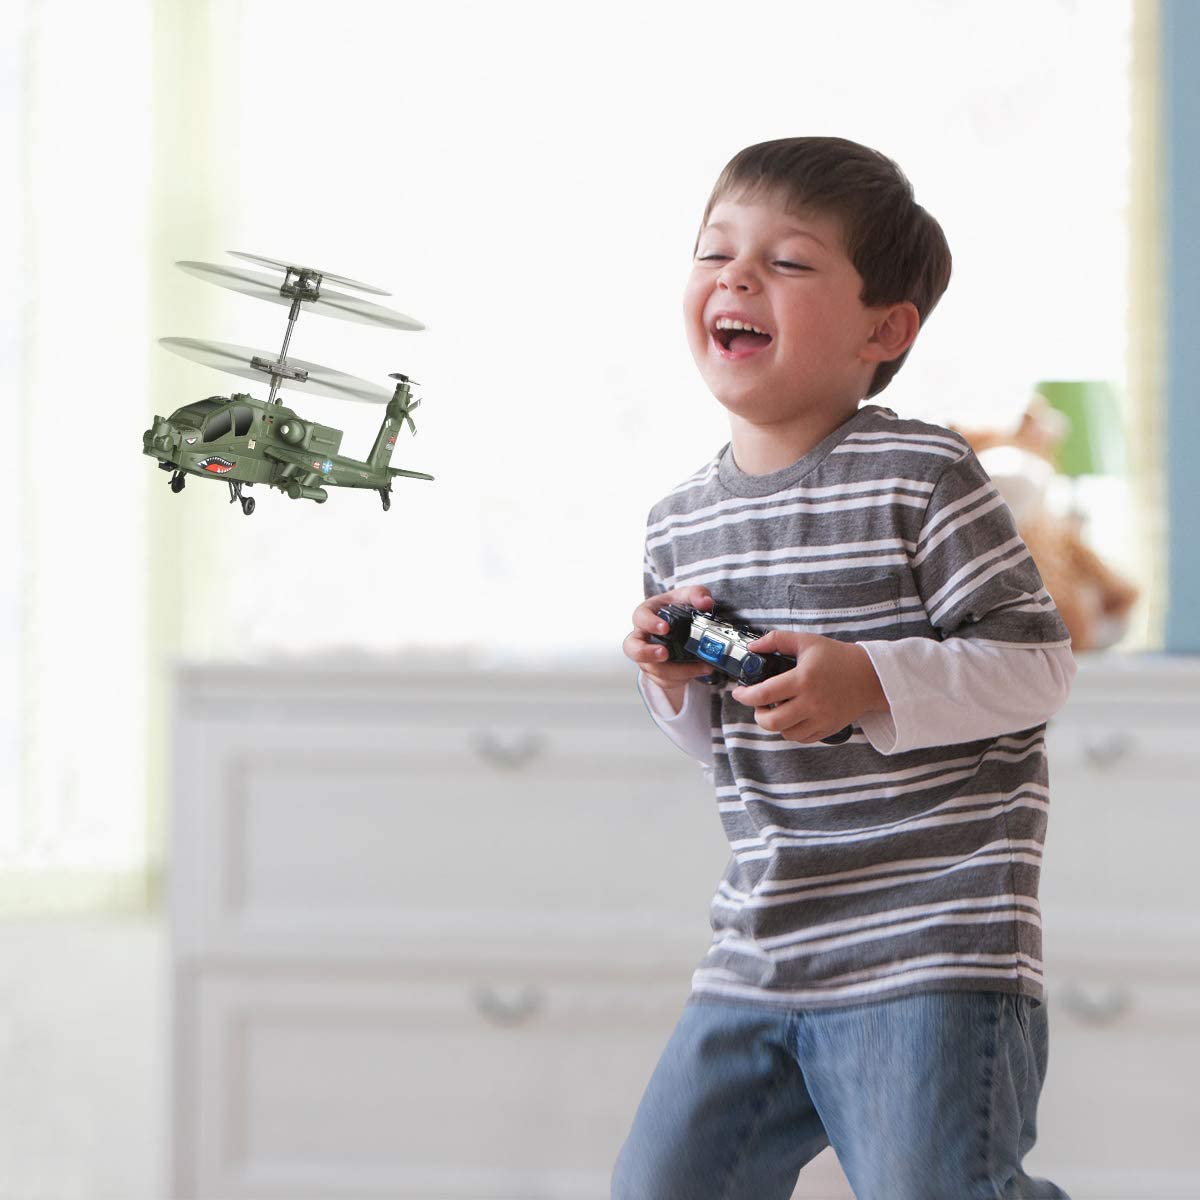 Syma-S109G-Remote-Control-Helicopter-3-5-Channel-RC-Helicopter-with-Gyro-RTF-for-Children-Beginners-4